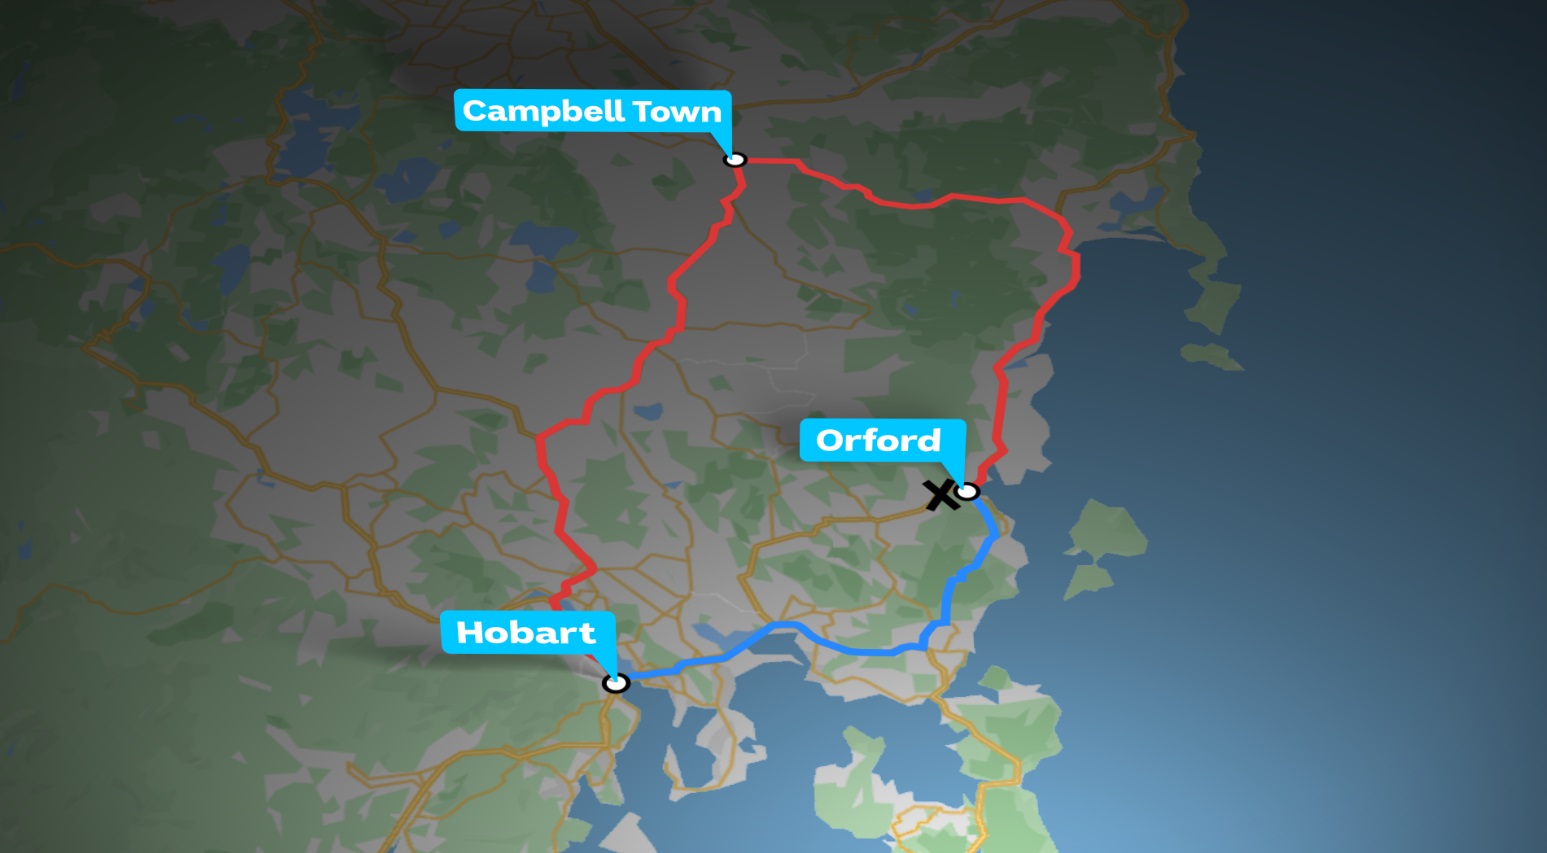 A map of a section of eastern Tasmania, showing Hobart, Orford and Campbell Town